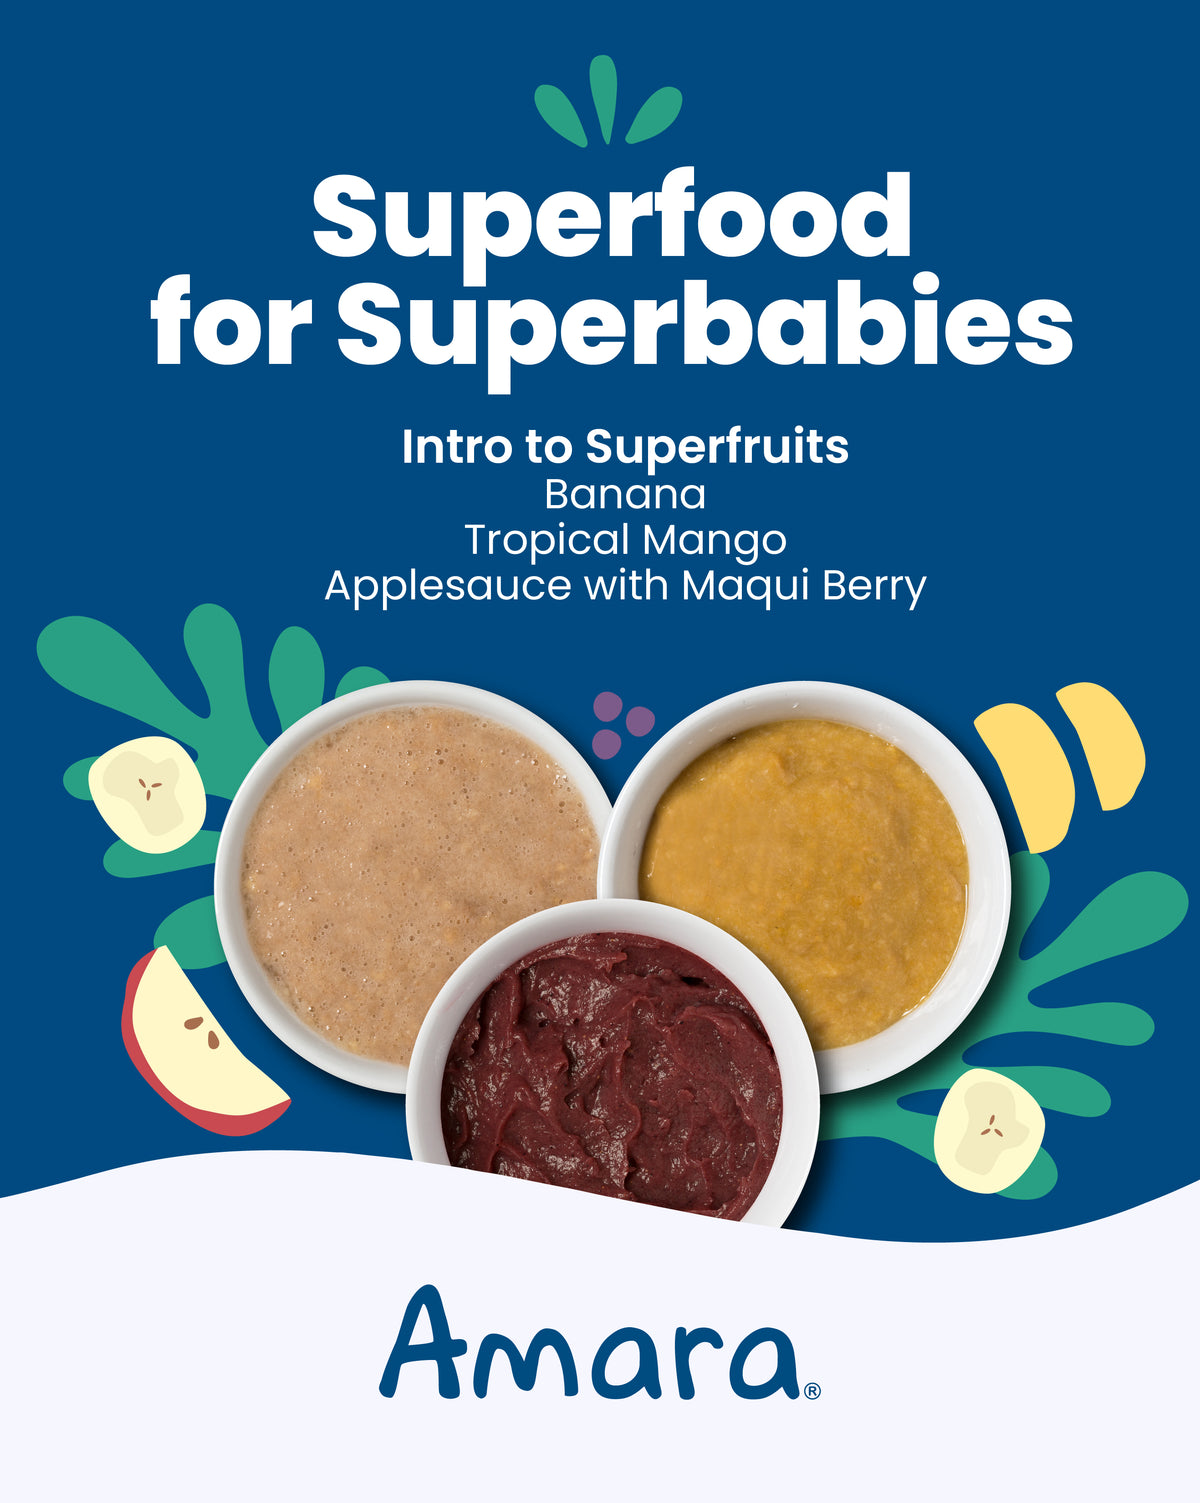 Introduction to Superfruits Variety Pack